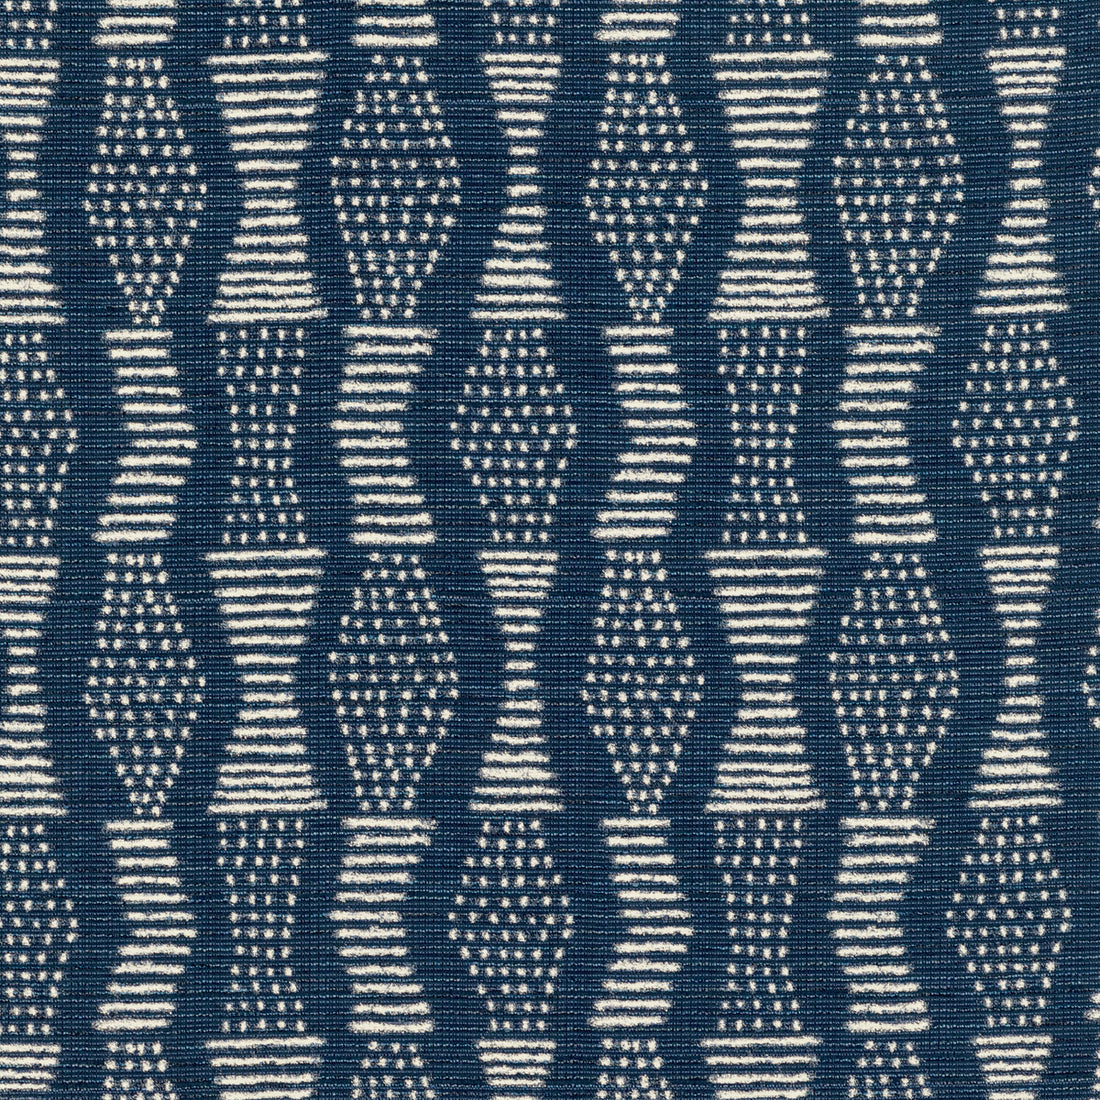 Kravet Design fabric in 36272-50 color - pattern 36272.50.0 - by Kravet Design in the Woven Colors collection